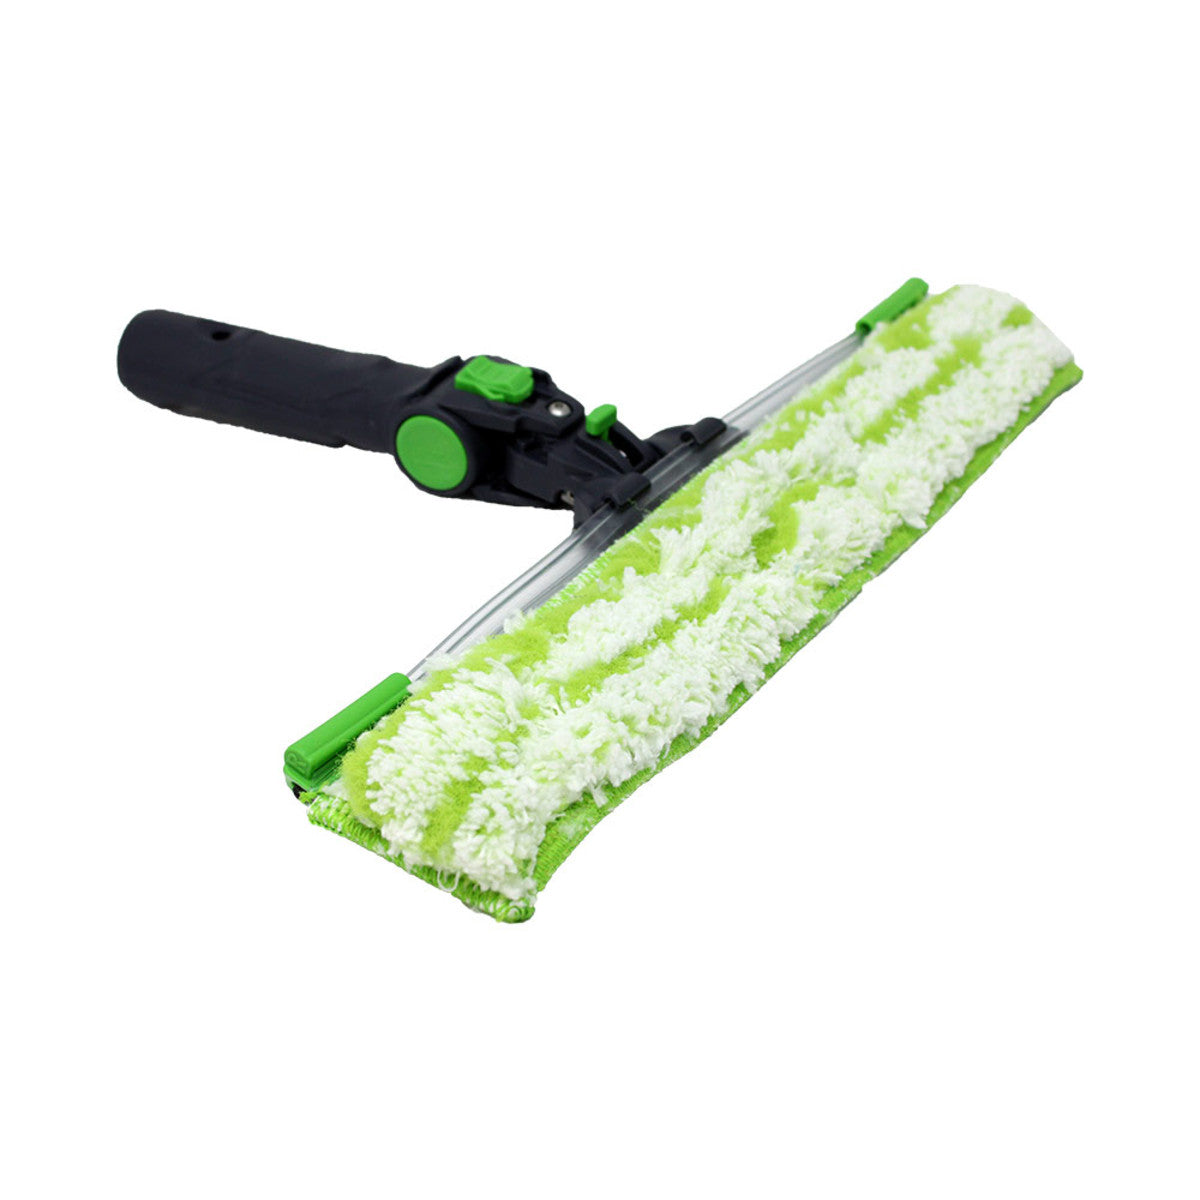 Pulex UniHandle Complete Squeegee & Washer Combination Tool